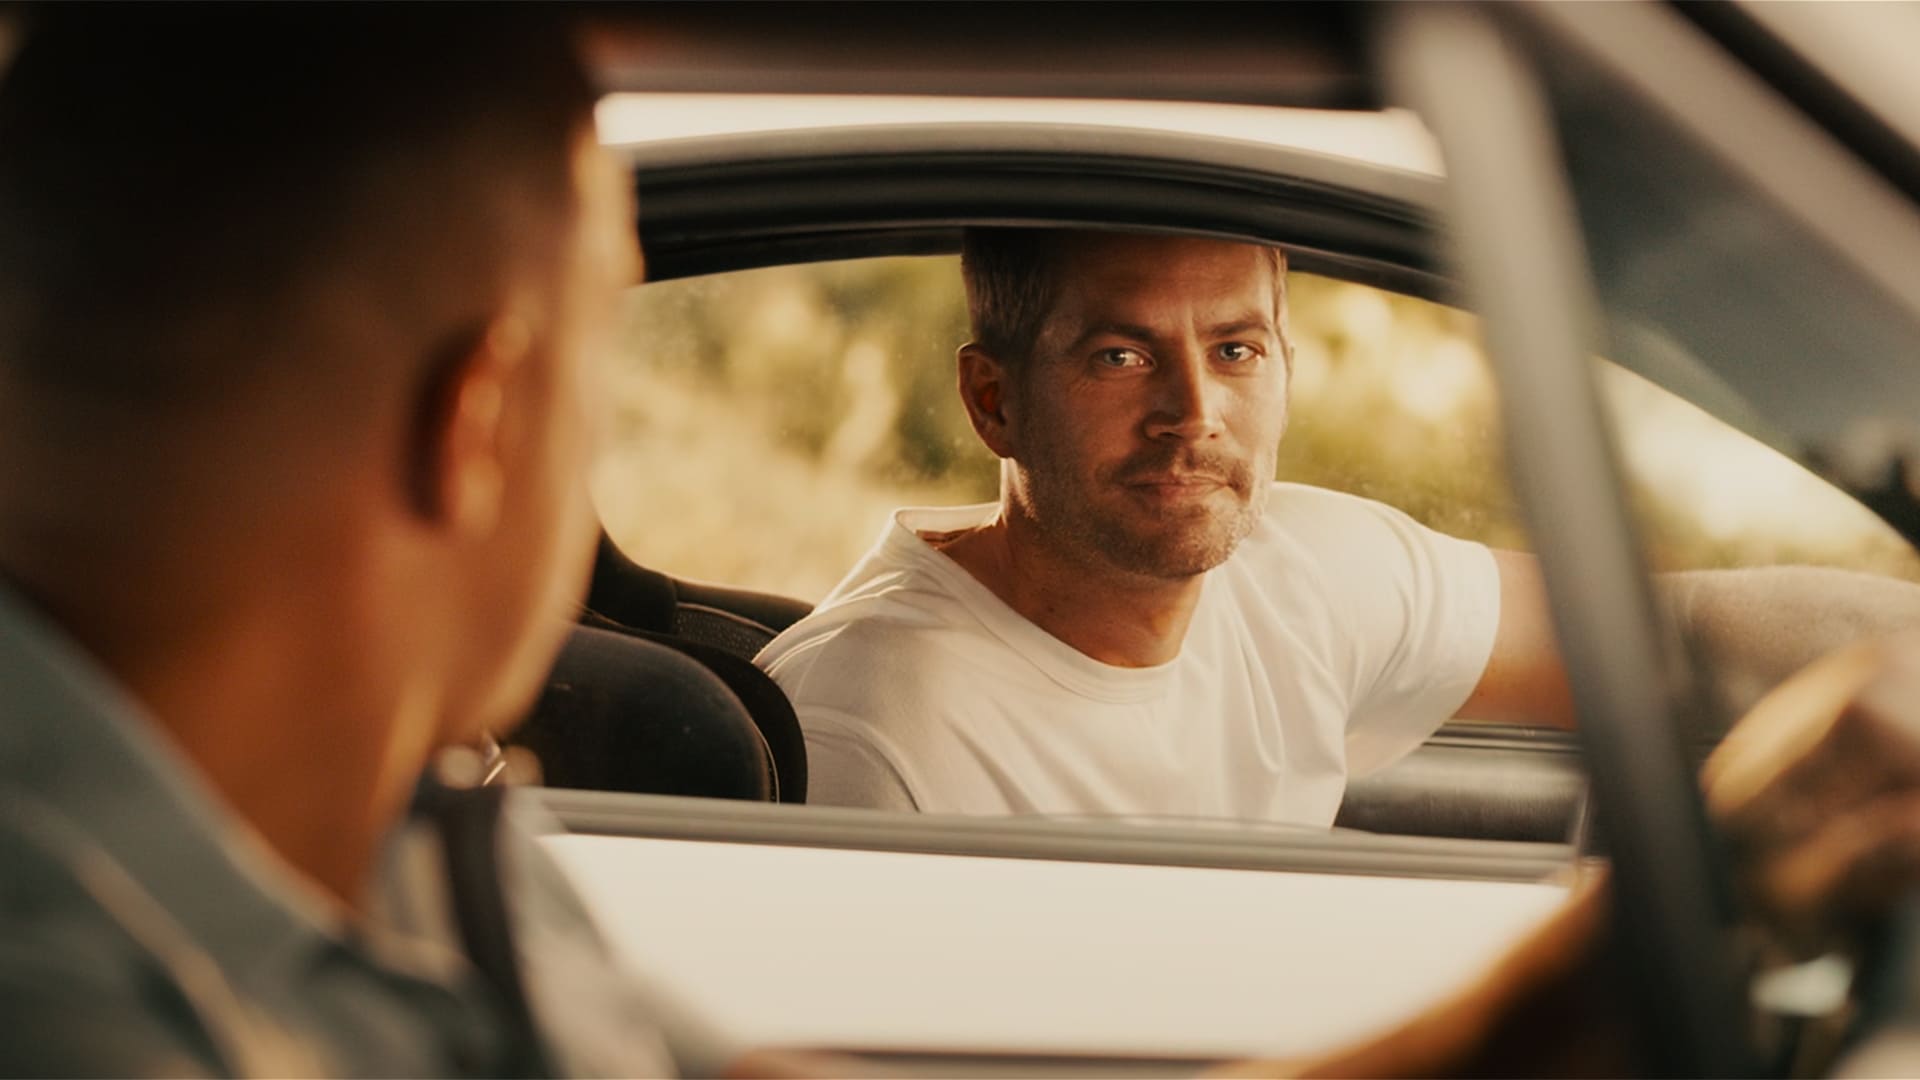 Image from the movie "Furious 7"